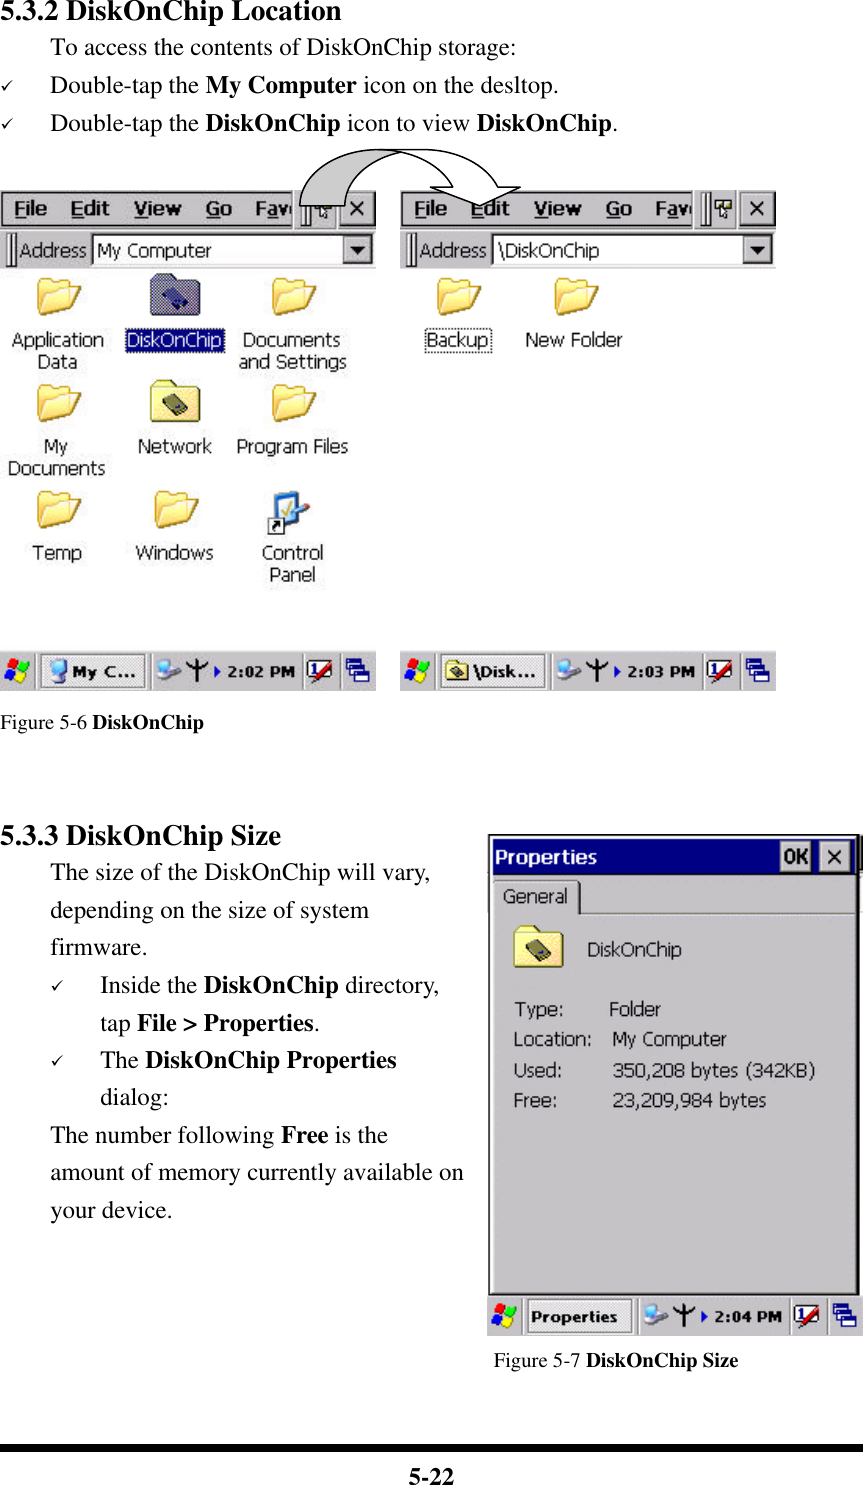  5-22 5.3.2 DiskOnChip Location To access the contents of DiskOnChip storage: ü Double-tap the My Computer icon on the desltop. ü Double-tap the DiskOnChip icon to view DiskOnChip.      Figure 5-6 DiskOnChip   5.3.3 DiskOnChip Size The size of the DiskOnChip will vary, depending on the size of system firmware. ü Inside the DiskOnChip directory, tap File &gt; Properties. ü The DiskOnChip Properties dialog: The number following Free is the amount of memory currently available on your device.                                                   Figure 5-7 DiskOnChip Size  